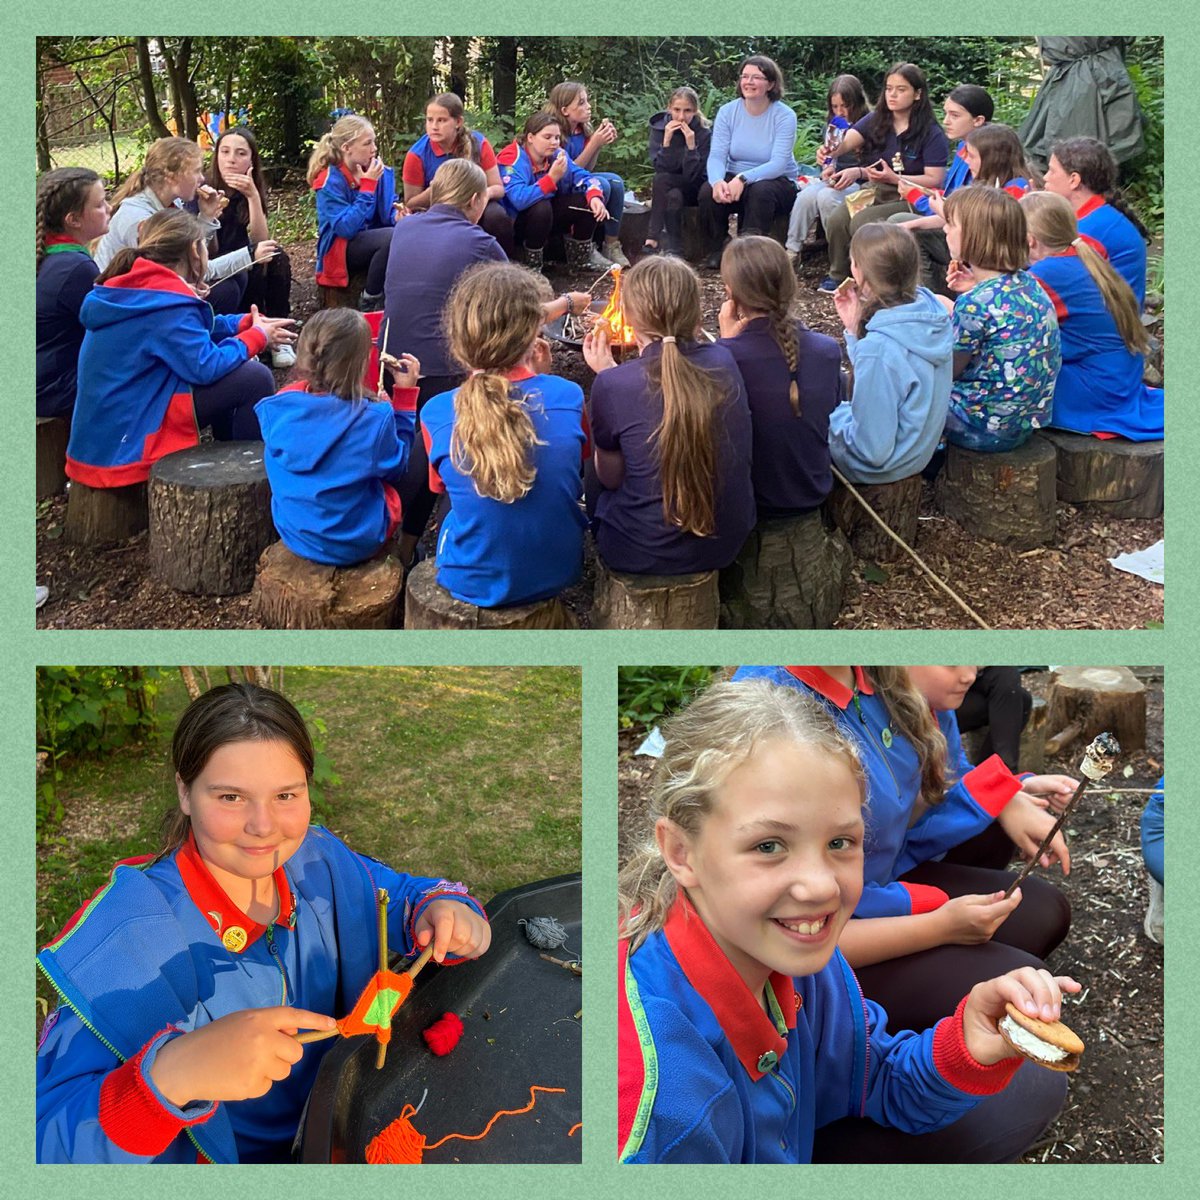 One of our Guide’s Mum is a Forrest school leader & she ran a session for us tonight. The #Guides had a great time whittling, fire lighting with flint & steels, leaf bashing, square lashing & eating s’mores! 

#GirlsCanDoAnything #Girlguiding #OutdoorFun #OckfordRidge #Godalming